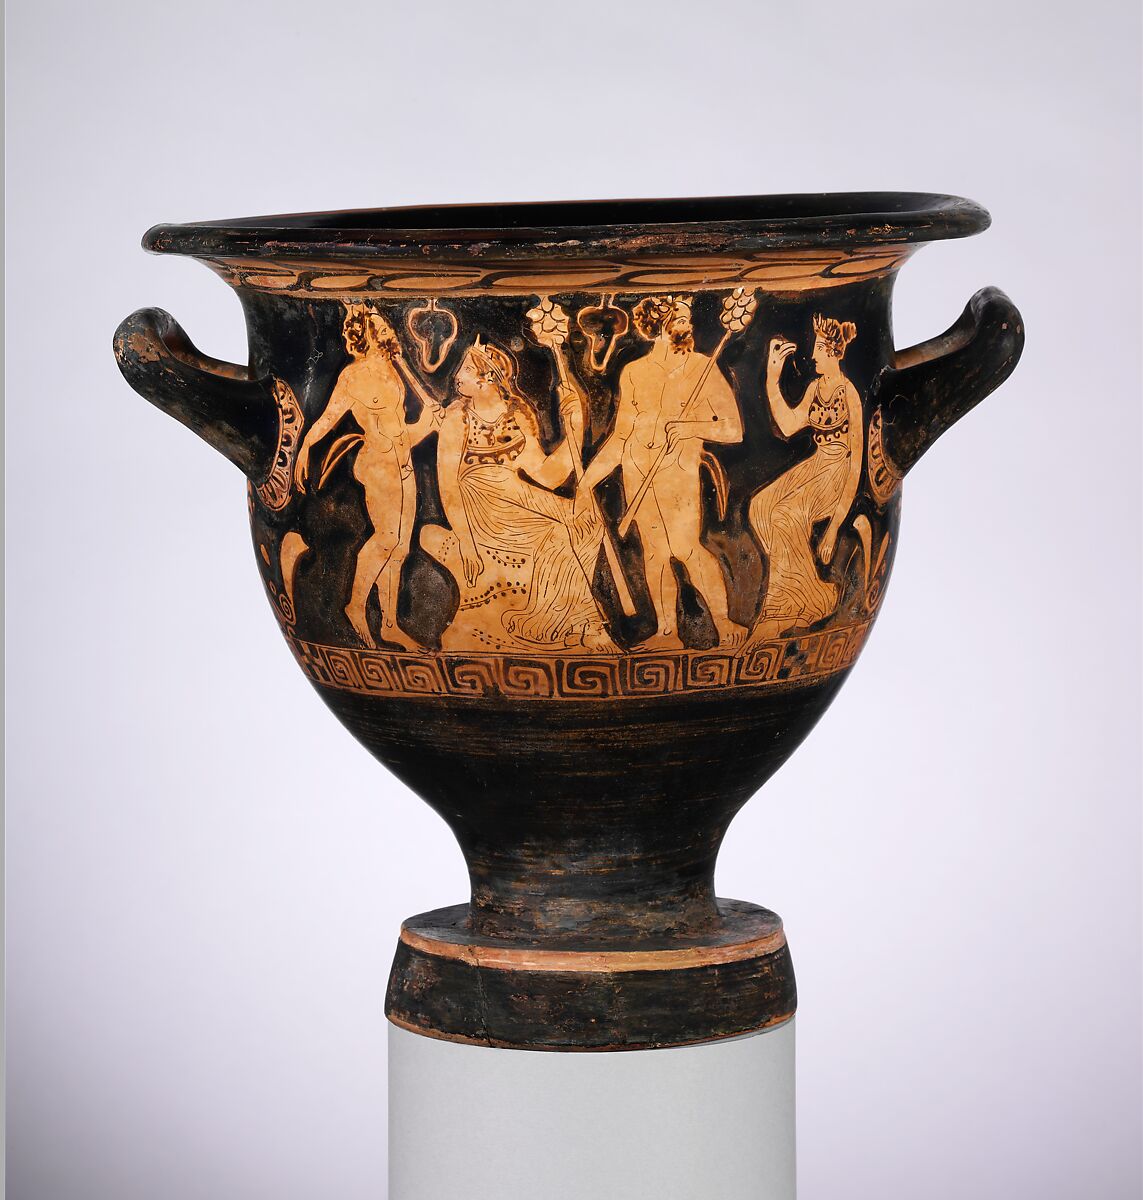 Terracotta bell-krater (vase for mixing wine and water), Attributed to the Meleager Painter, Terracotta, Greek, Attic 